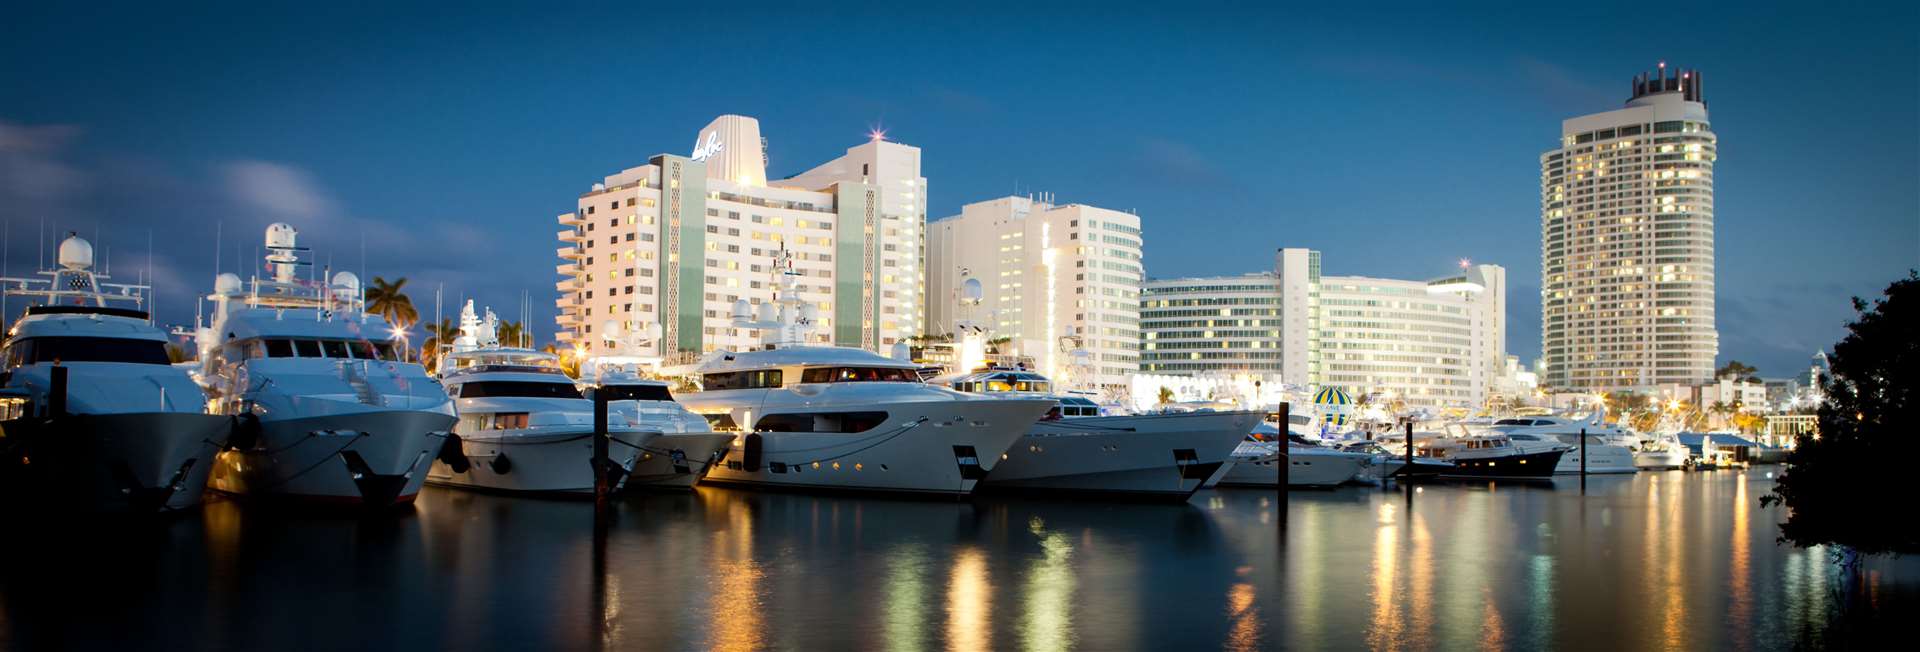 Yachts in front of the Eden Roc Miami Beach Hotel. Picture: Greater Miami Convention & Visitors Bureau